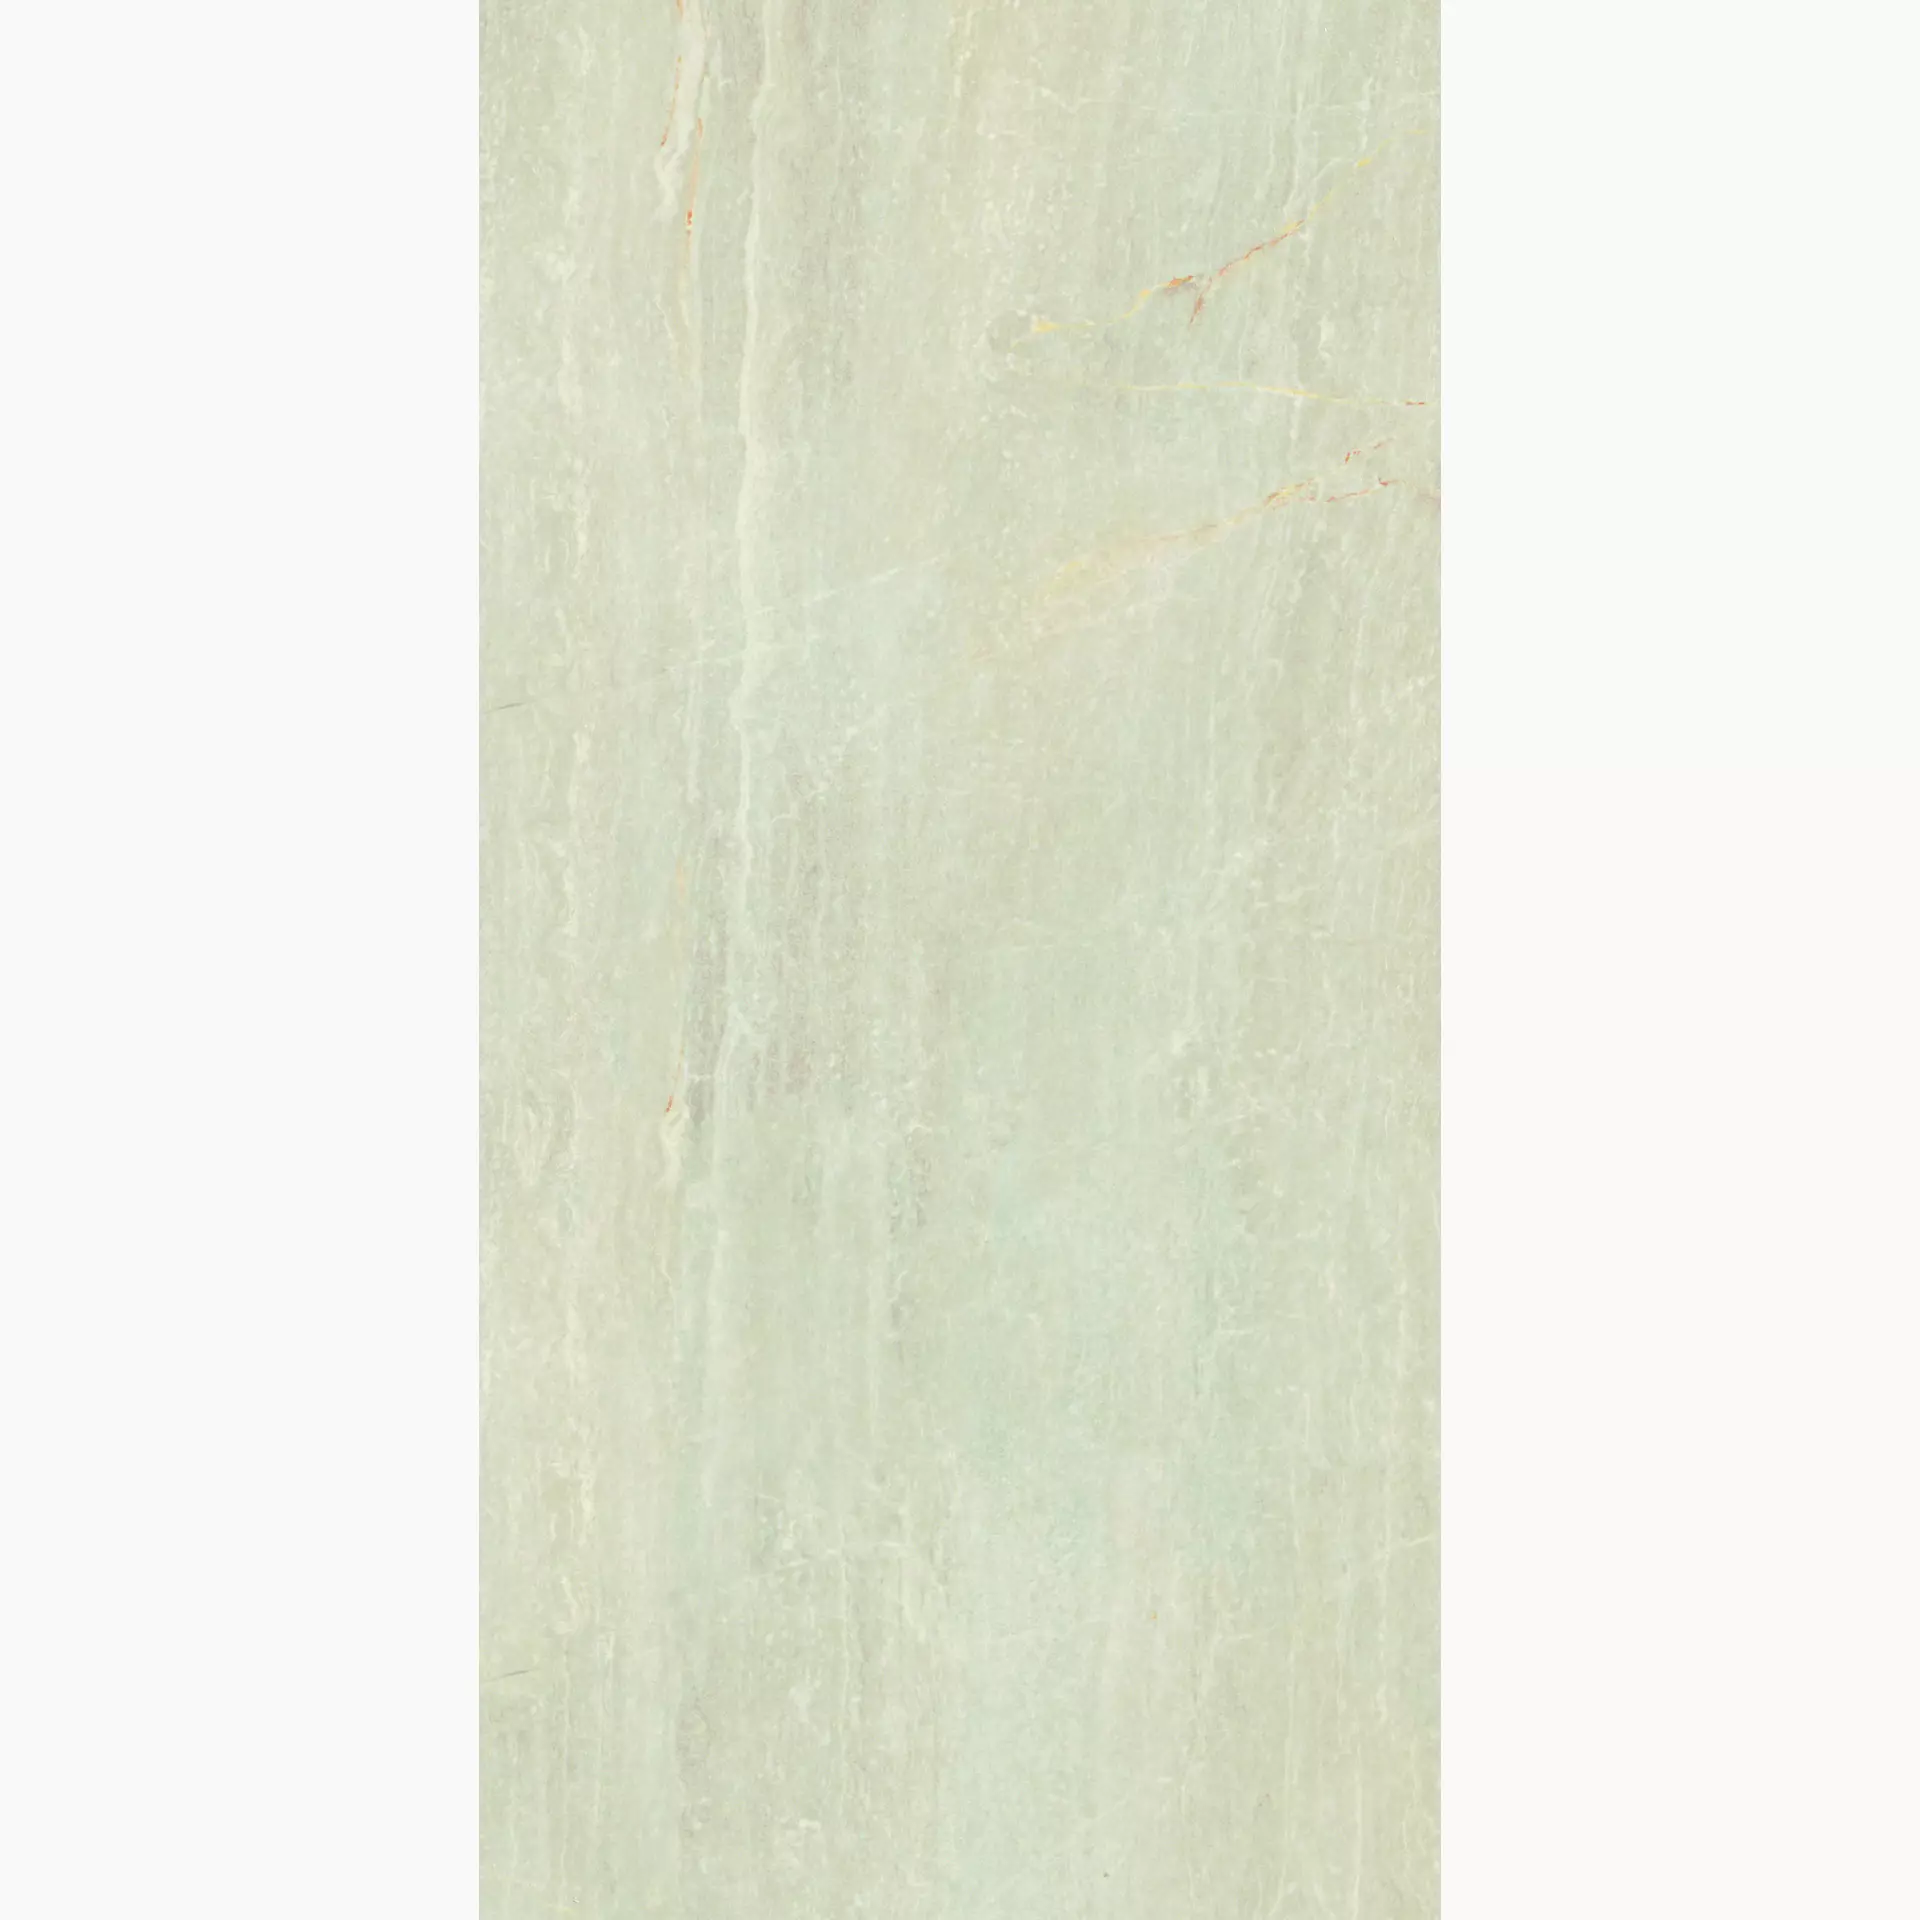 Serenissima Fossil Crema Lux 1066583 30x60cm rectified 9,5mm